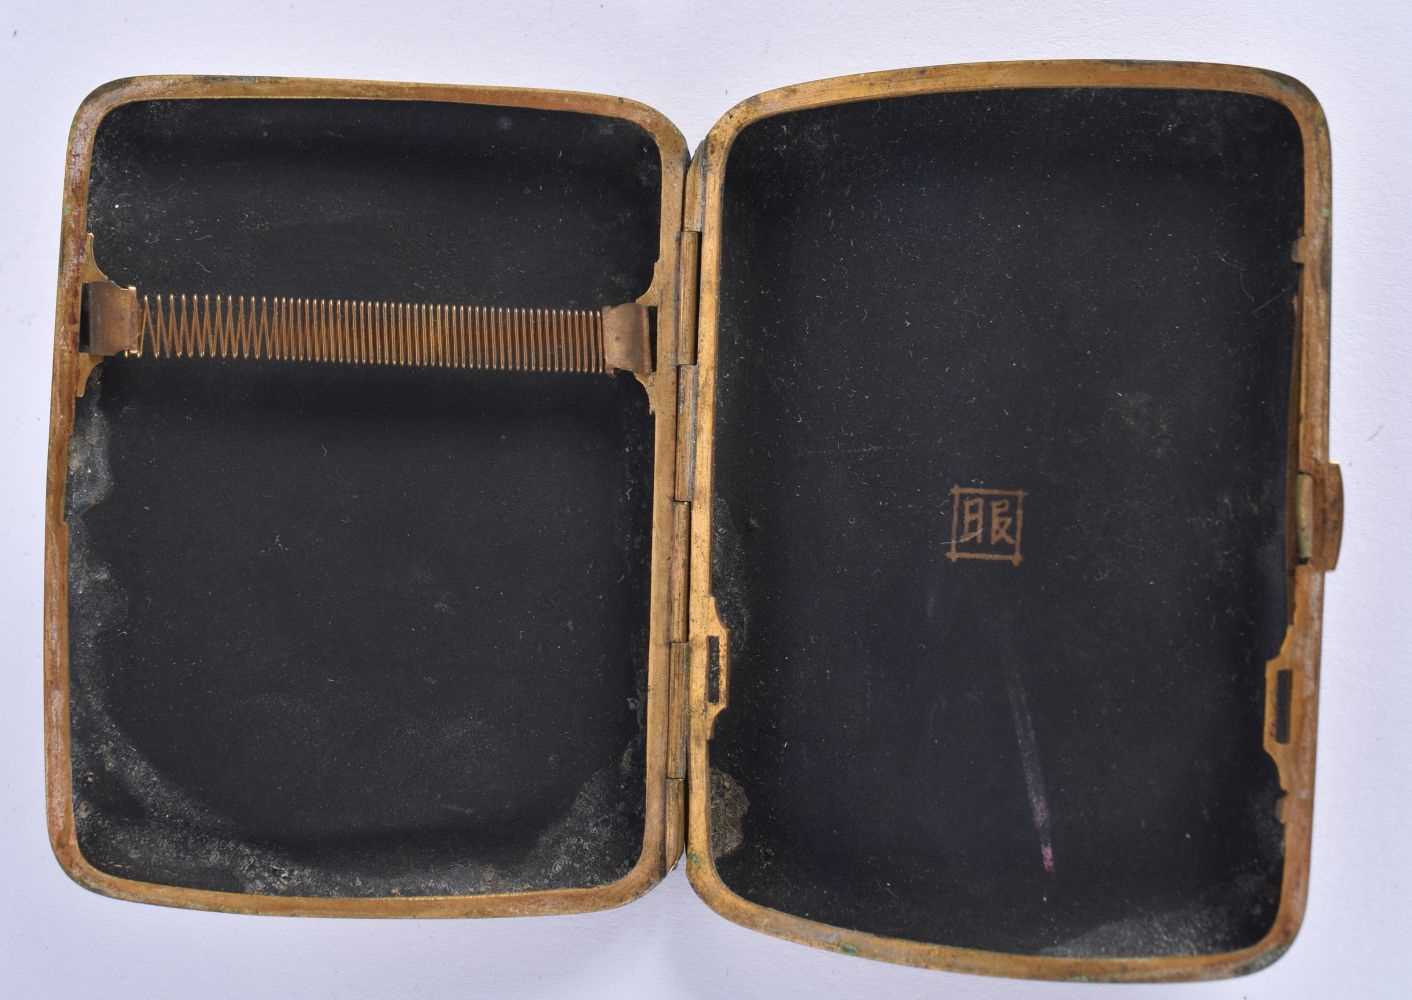 A 19TH CENTURY JAPANESE MEIJI PERIOD KOMAI STYLE DAMASCENED CIGARETTE CASE decorated with dragons - Image 2 of 3